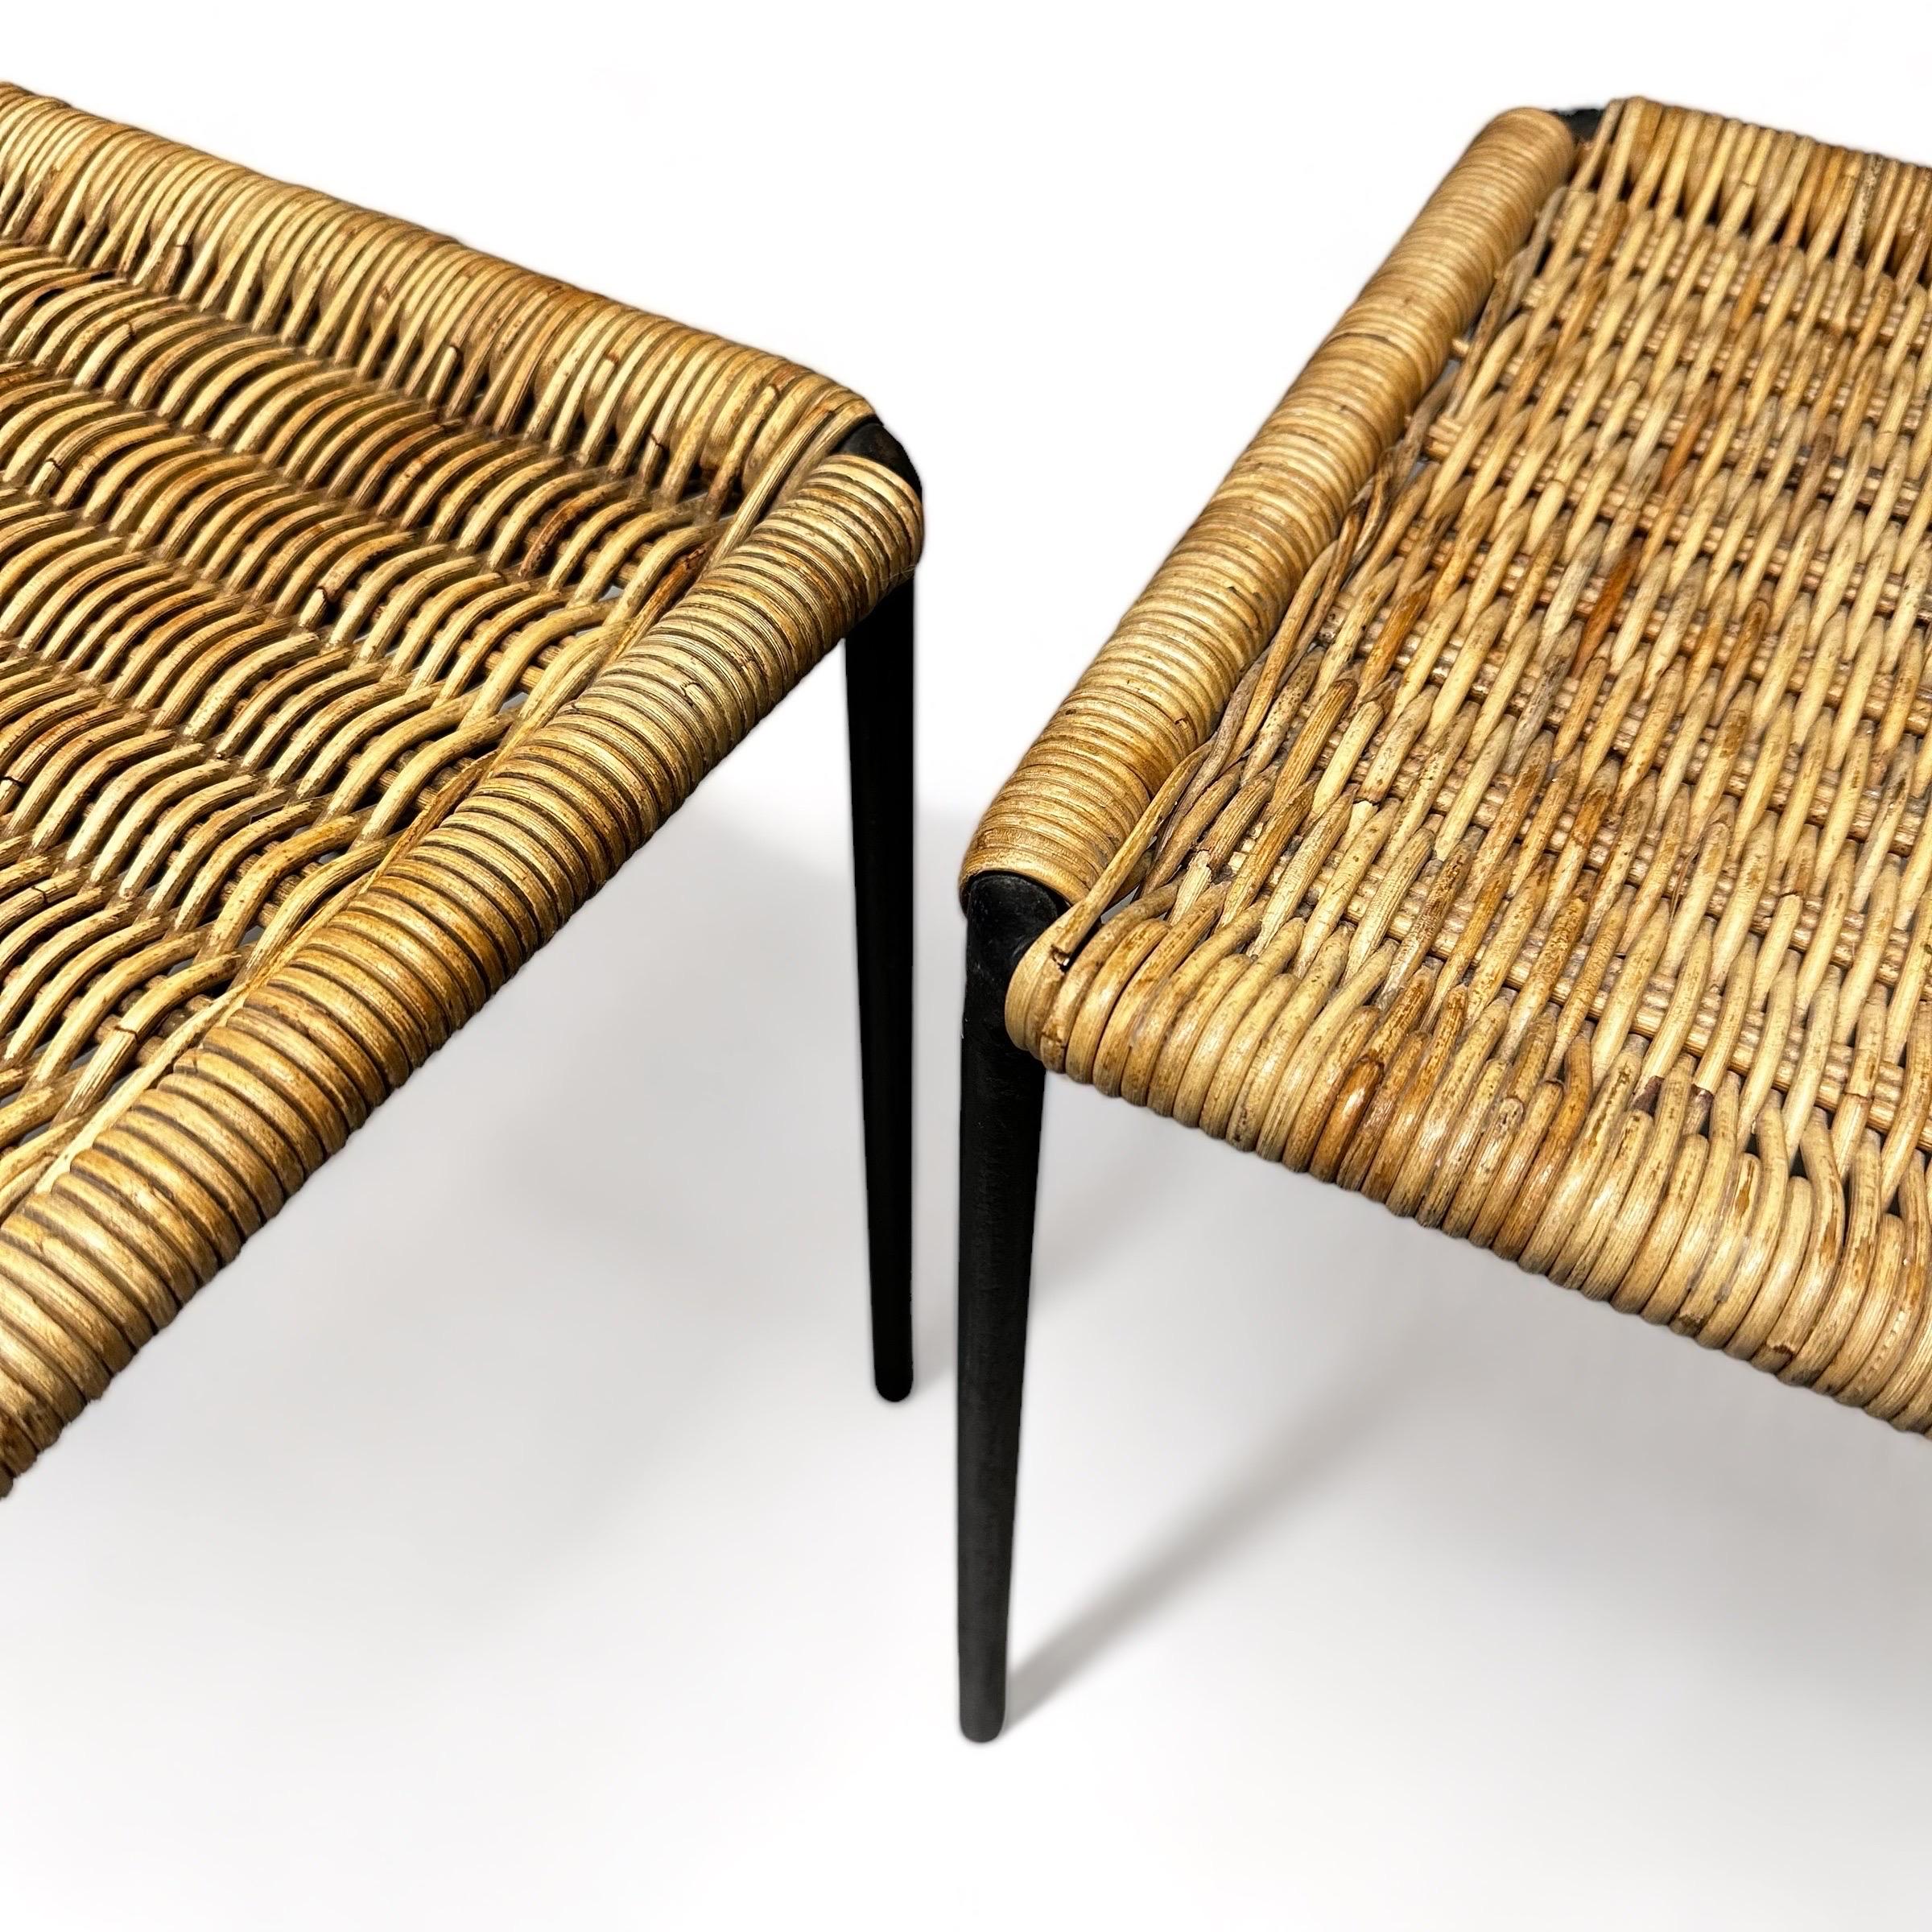 Austrian Carl Auböck Side Tables with Black Iron and Rattan, Set of Two, Austria 1950s For Sale